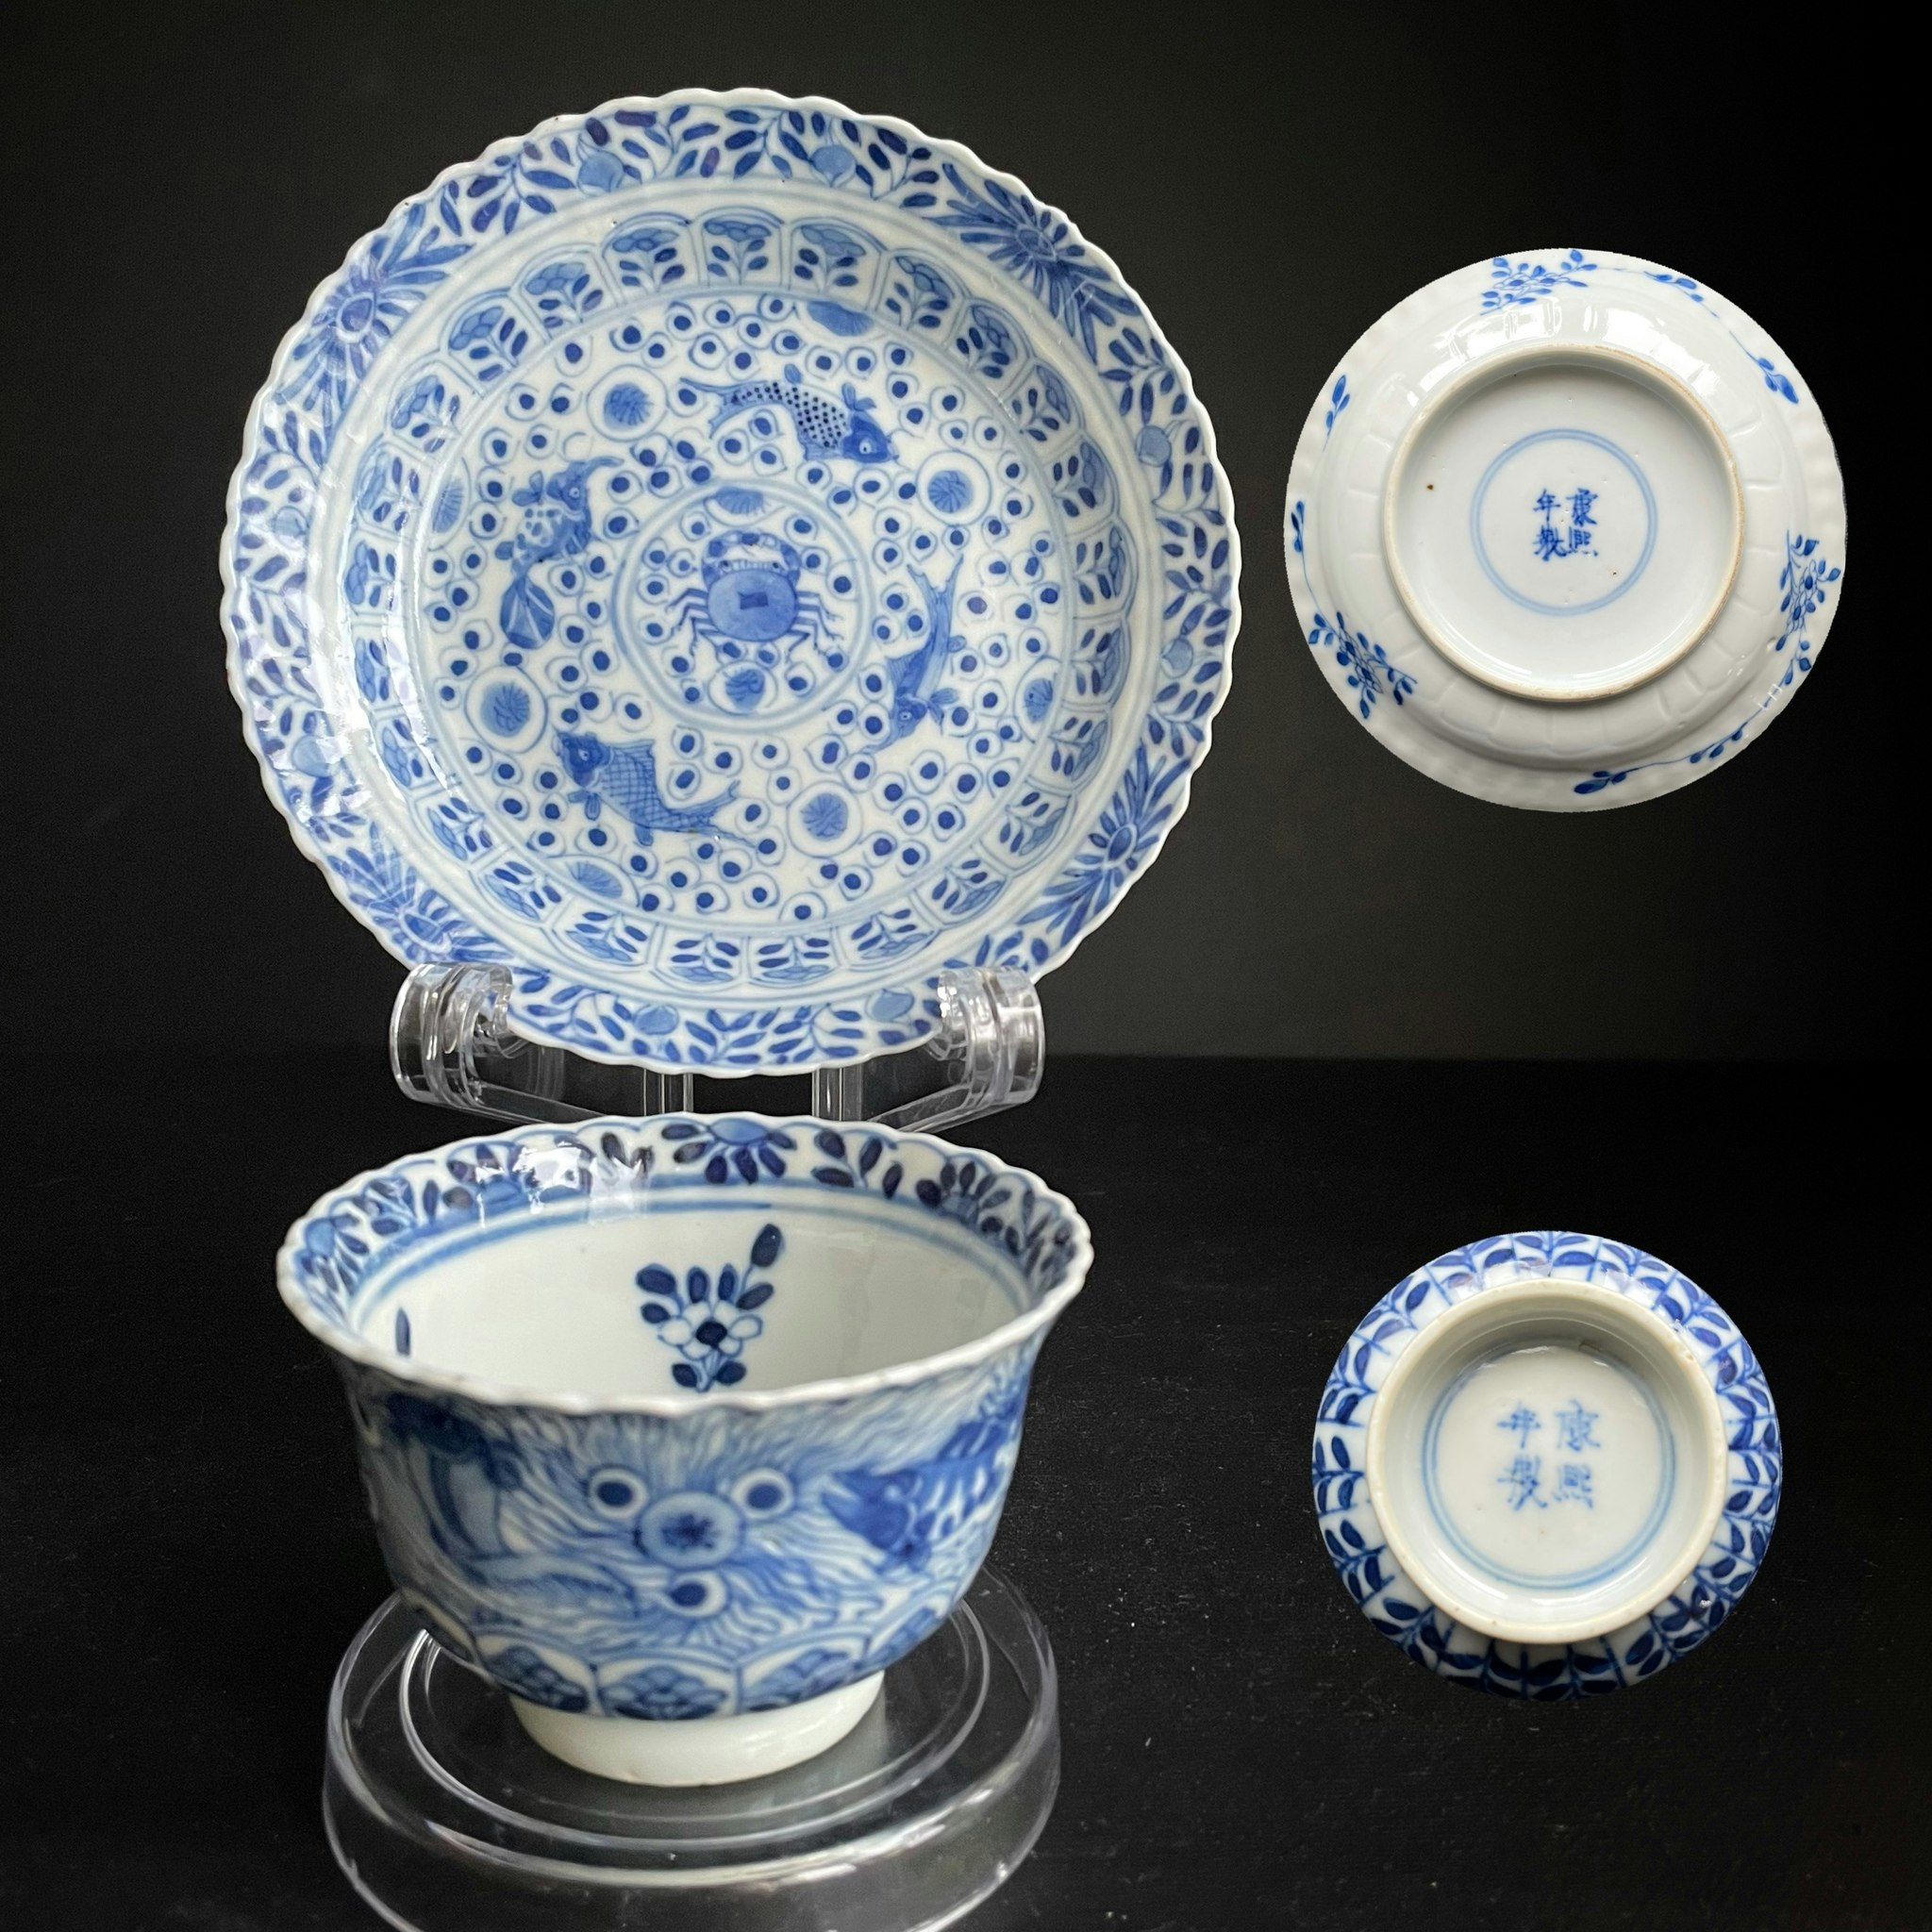 Antique Chinese Teacup & Saucer in underglazed blue & white, Late Qing #888, 889